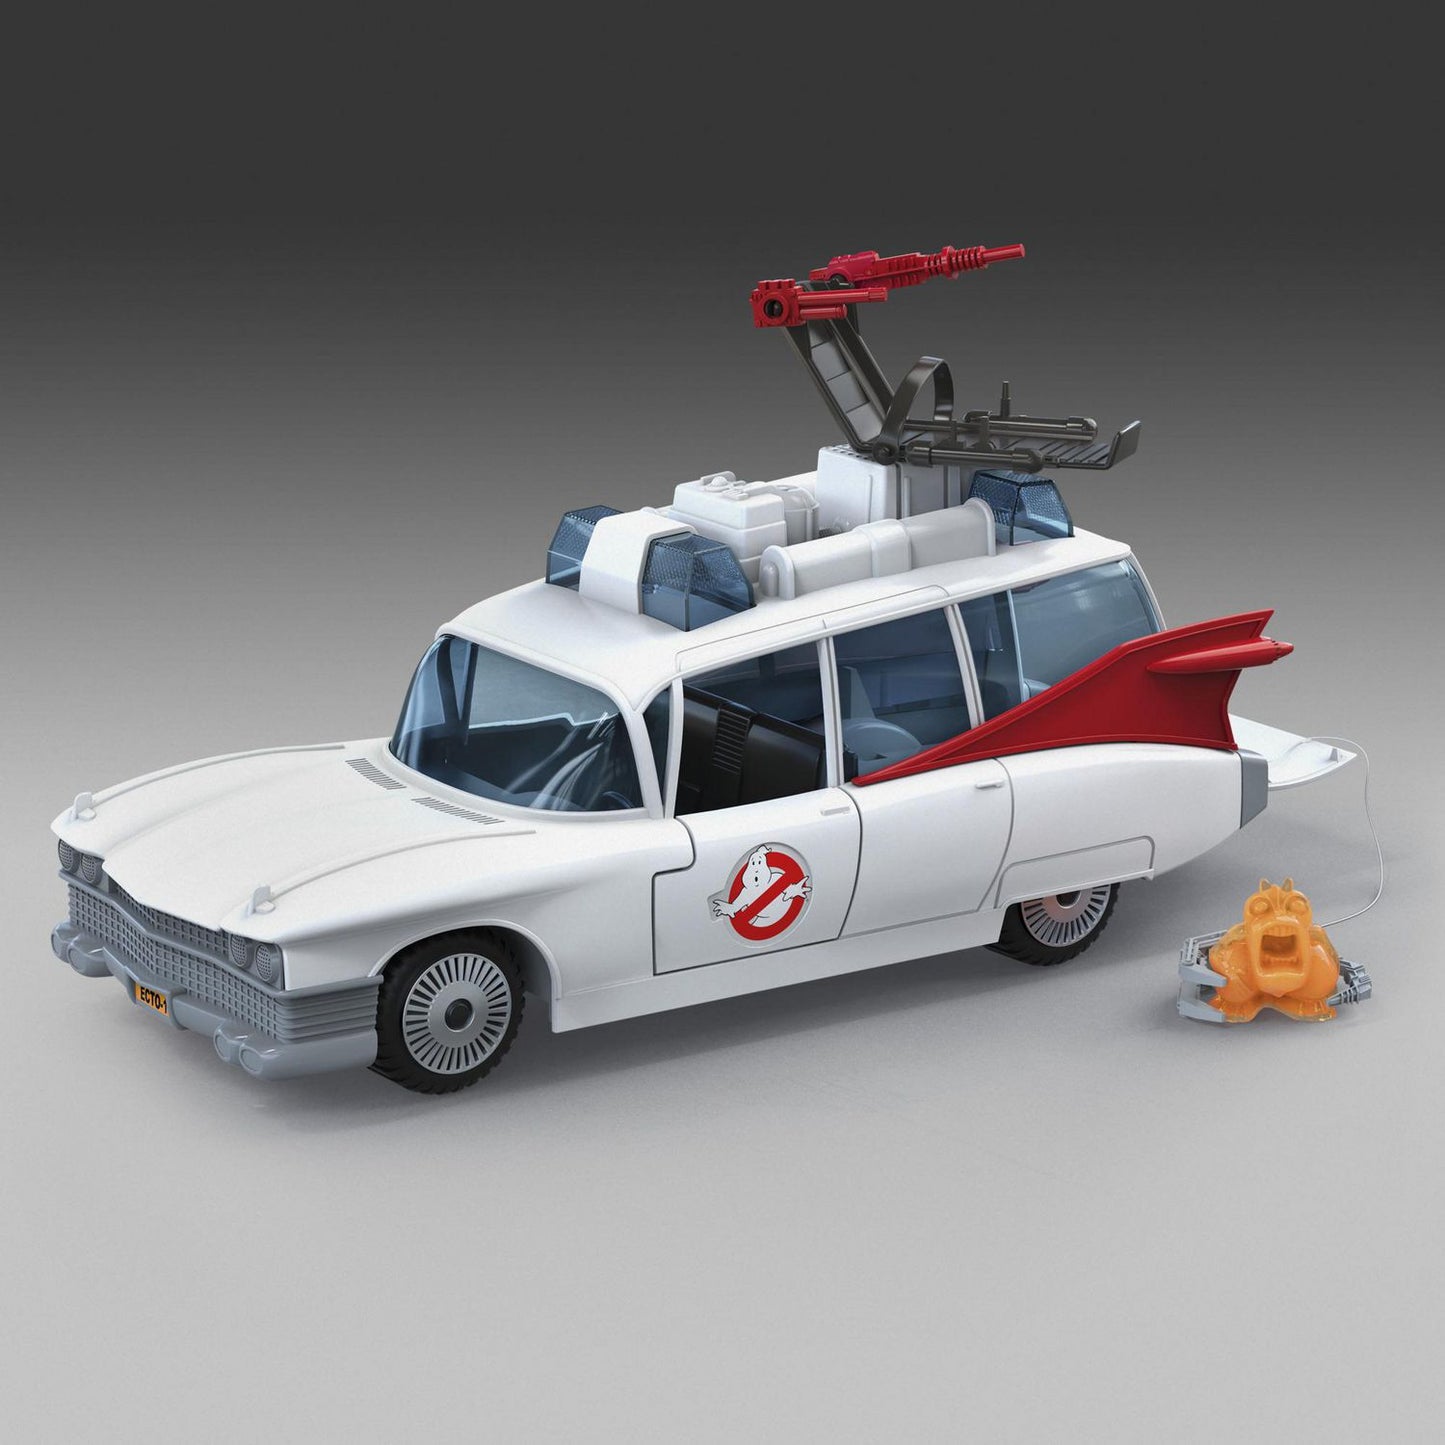 REAL GHOSTBUSTERS: ECTO-1 - KENNER-CLASSIC-2021 RE-ISSUE